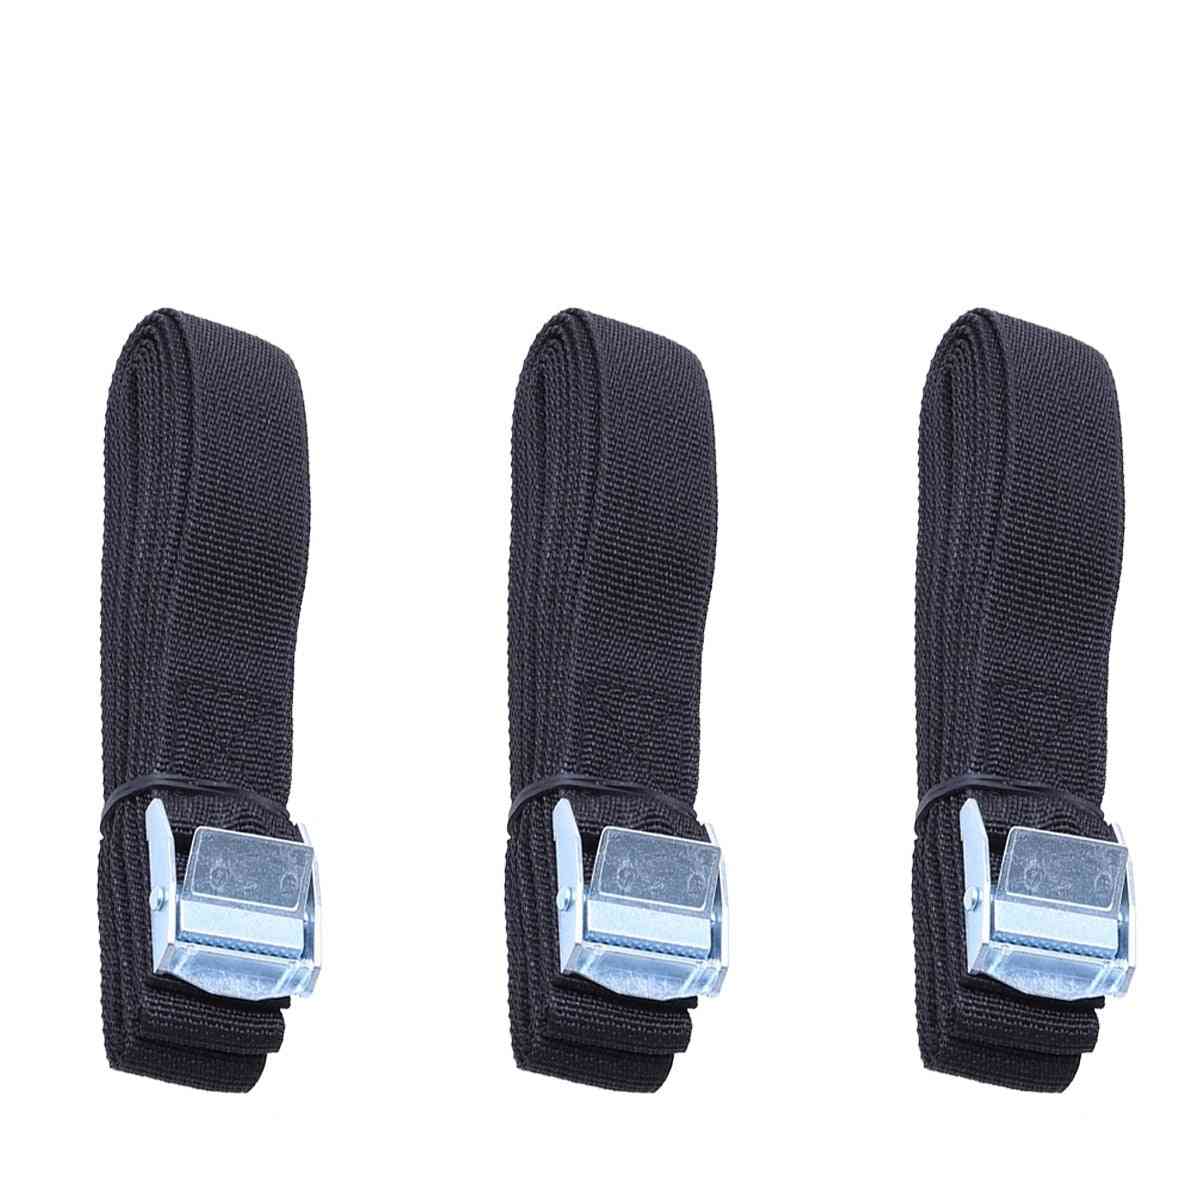 6pcs Polyester Quick Release Lashing With Buckle Tying Straps For Cargo Tie Down Car Roof Rack Luggage Kayak Carrier Moving Cano